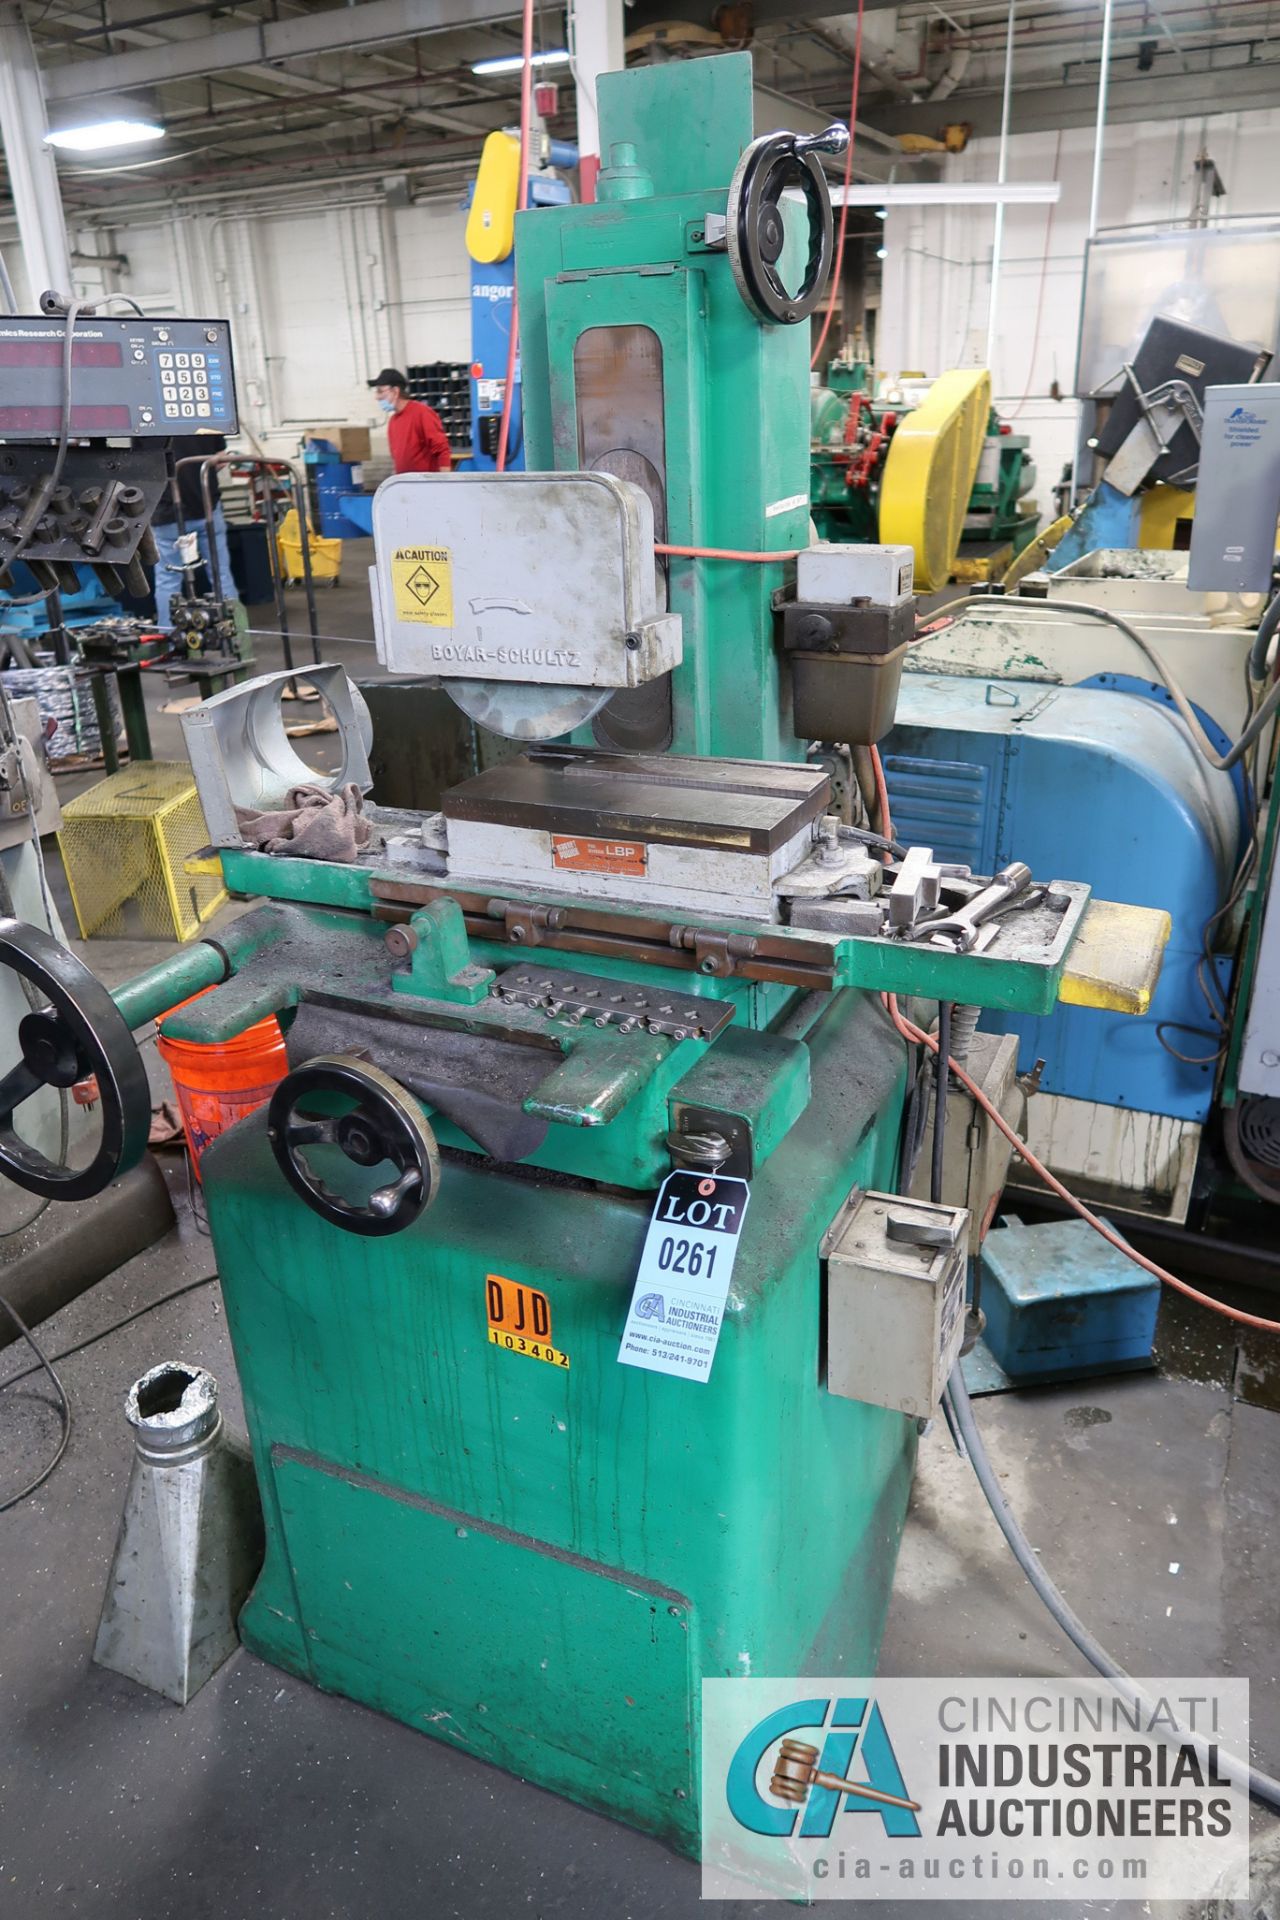 6" X 12" BOYER-SCHULTZ HAND FEED SURFACE GRINDER; S/N N/A, ASSET # 103402 **LOADING FEE DUE THE " - Image 2 of 4